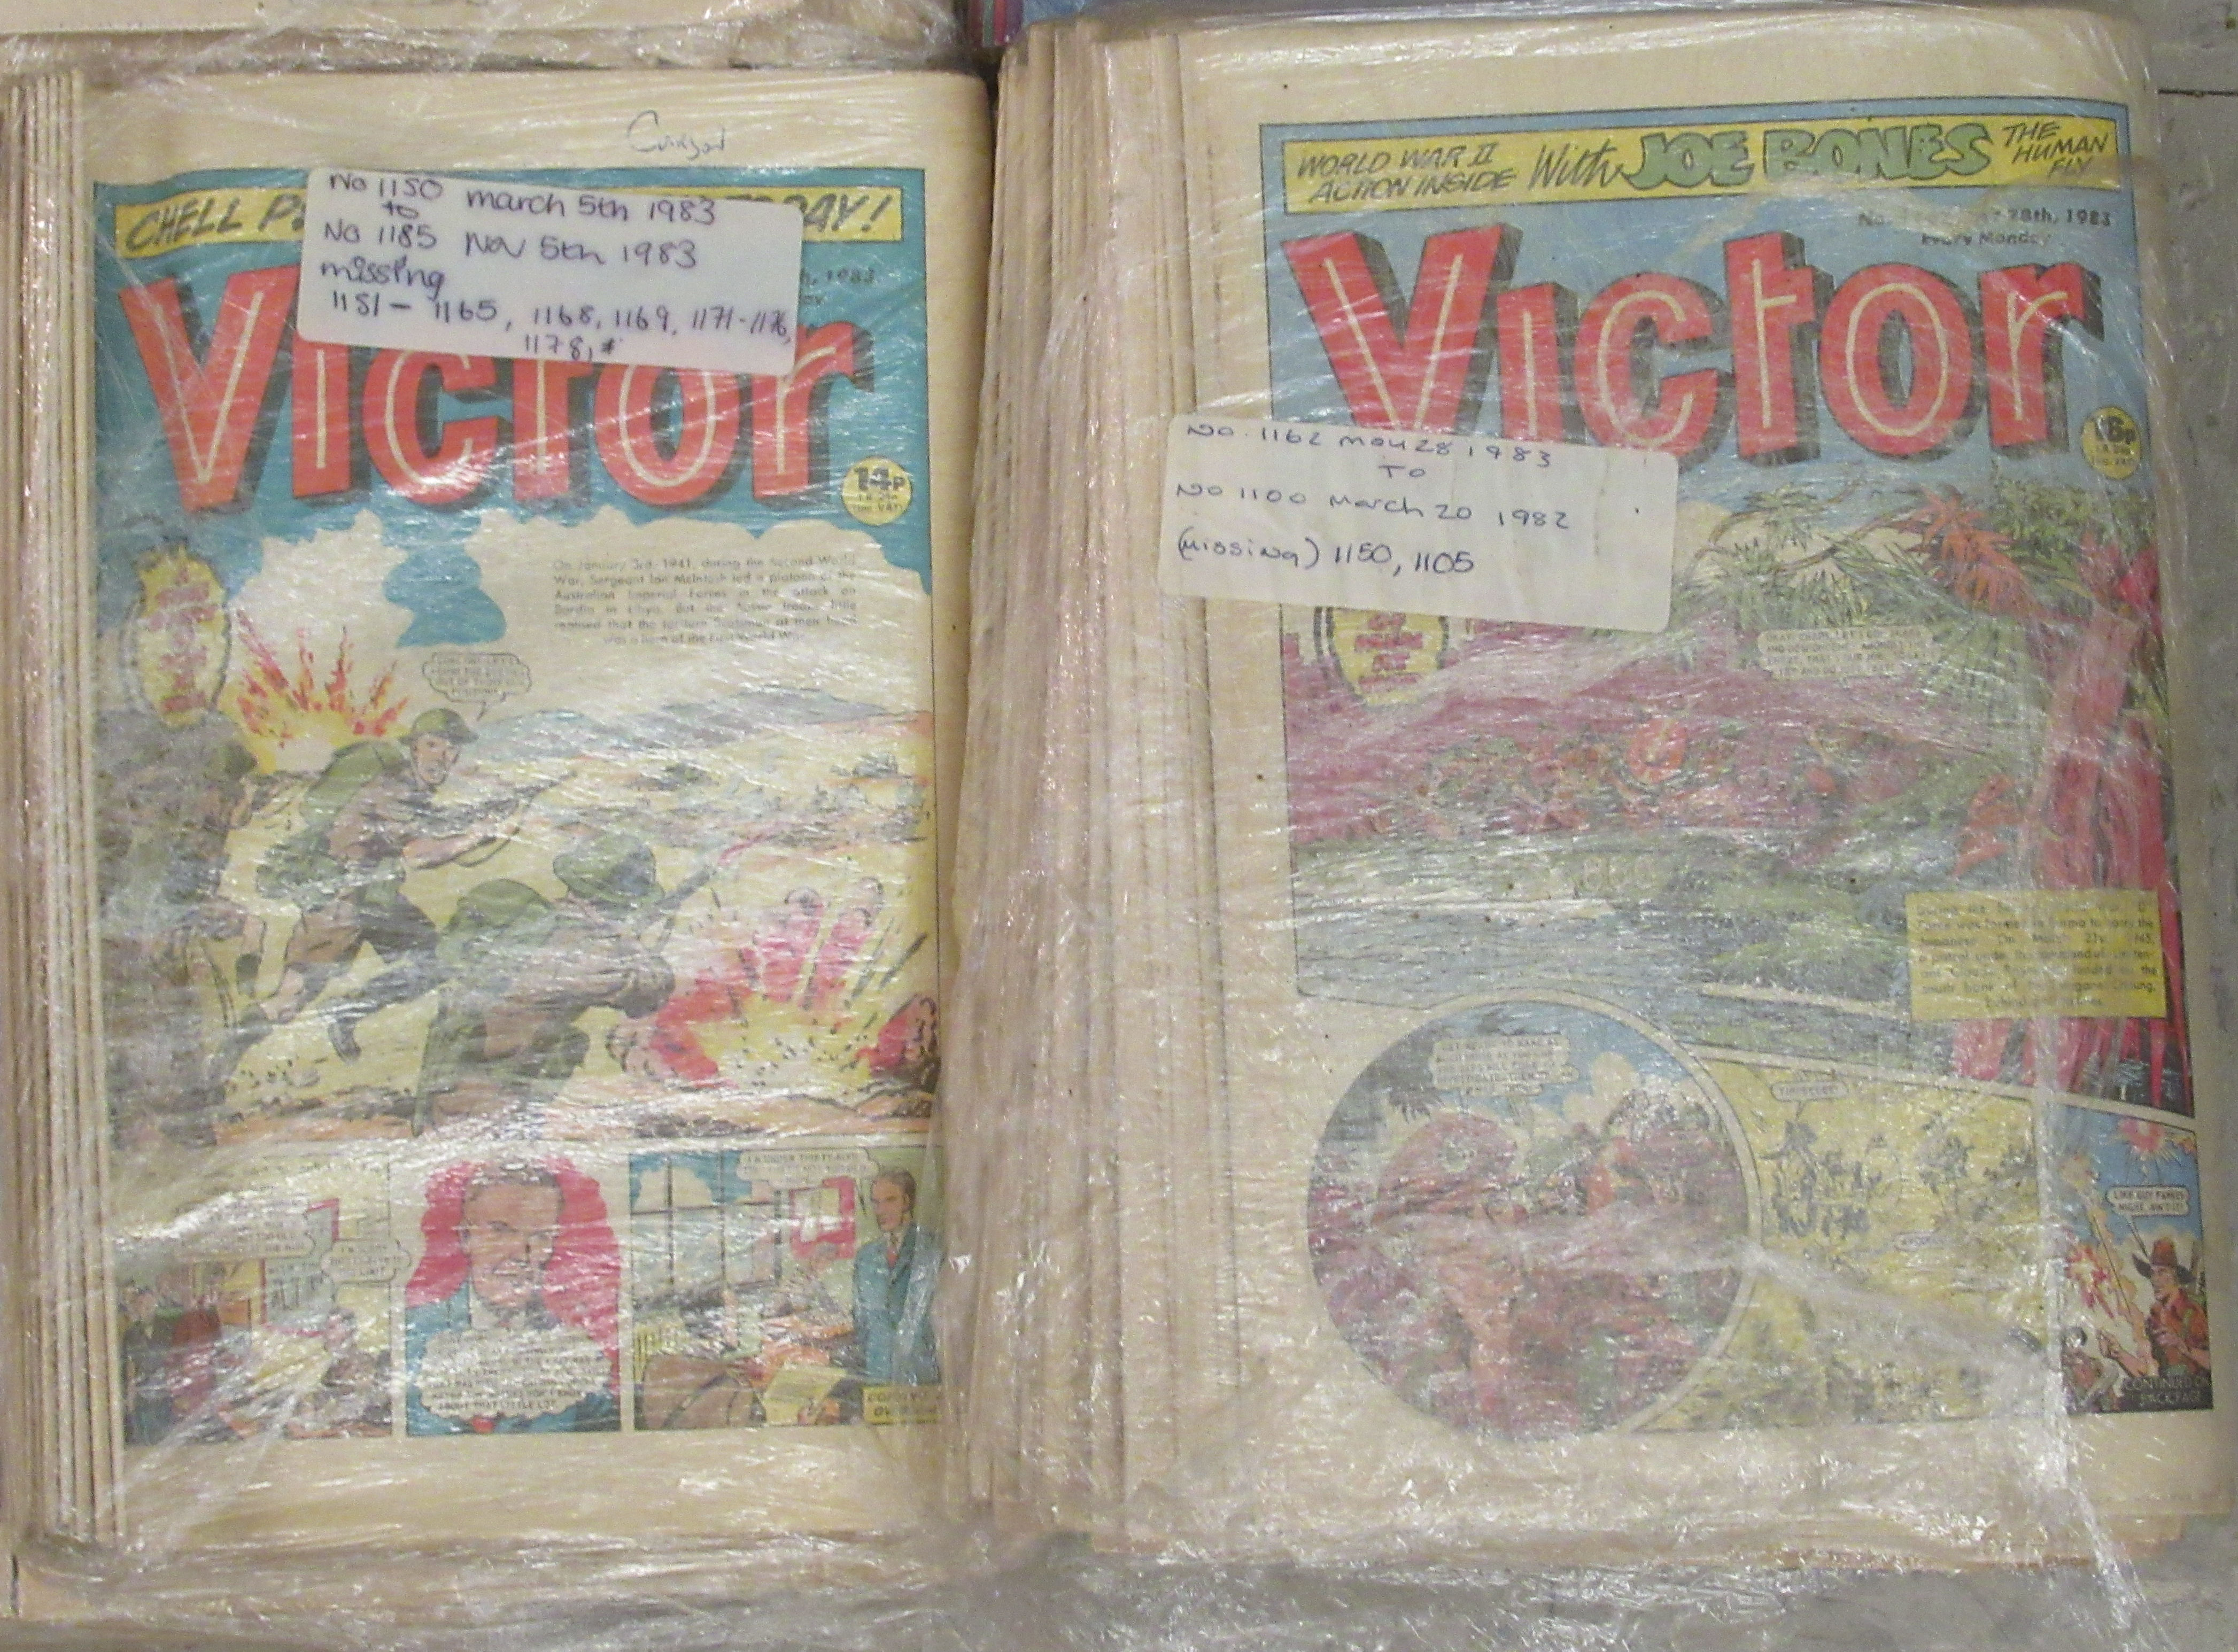 Post World War II comics: to include Victor transformers and Judy editions - Image 5 of 5